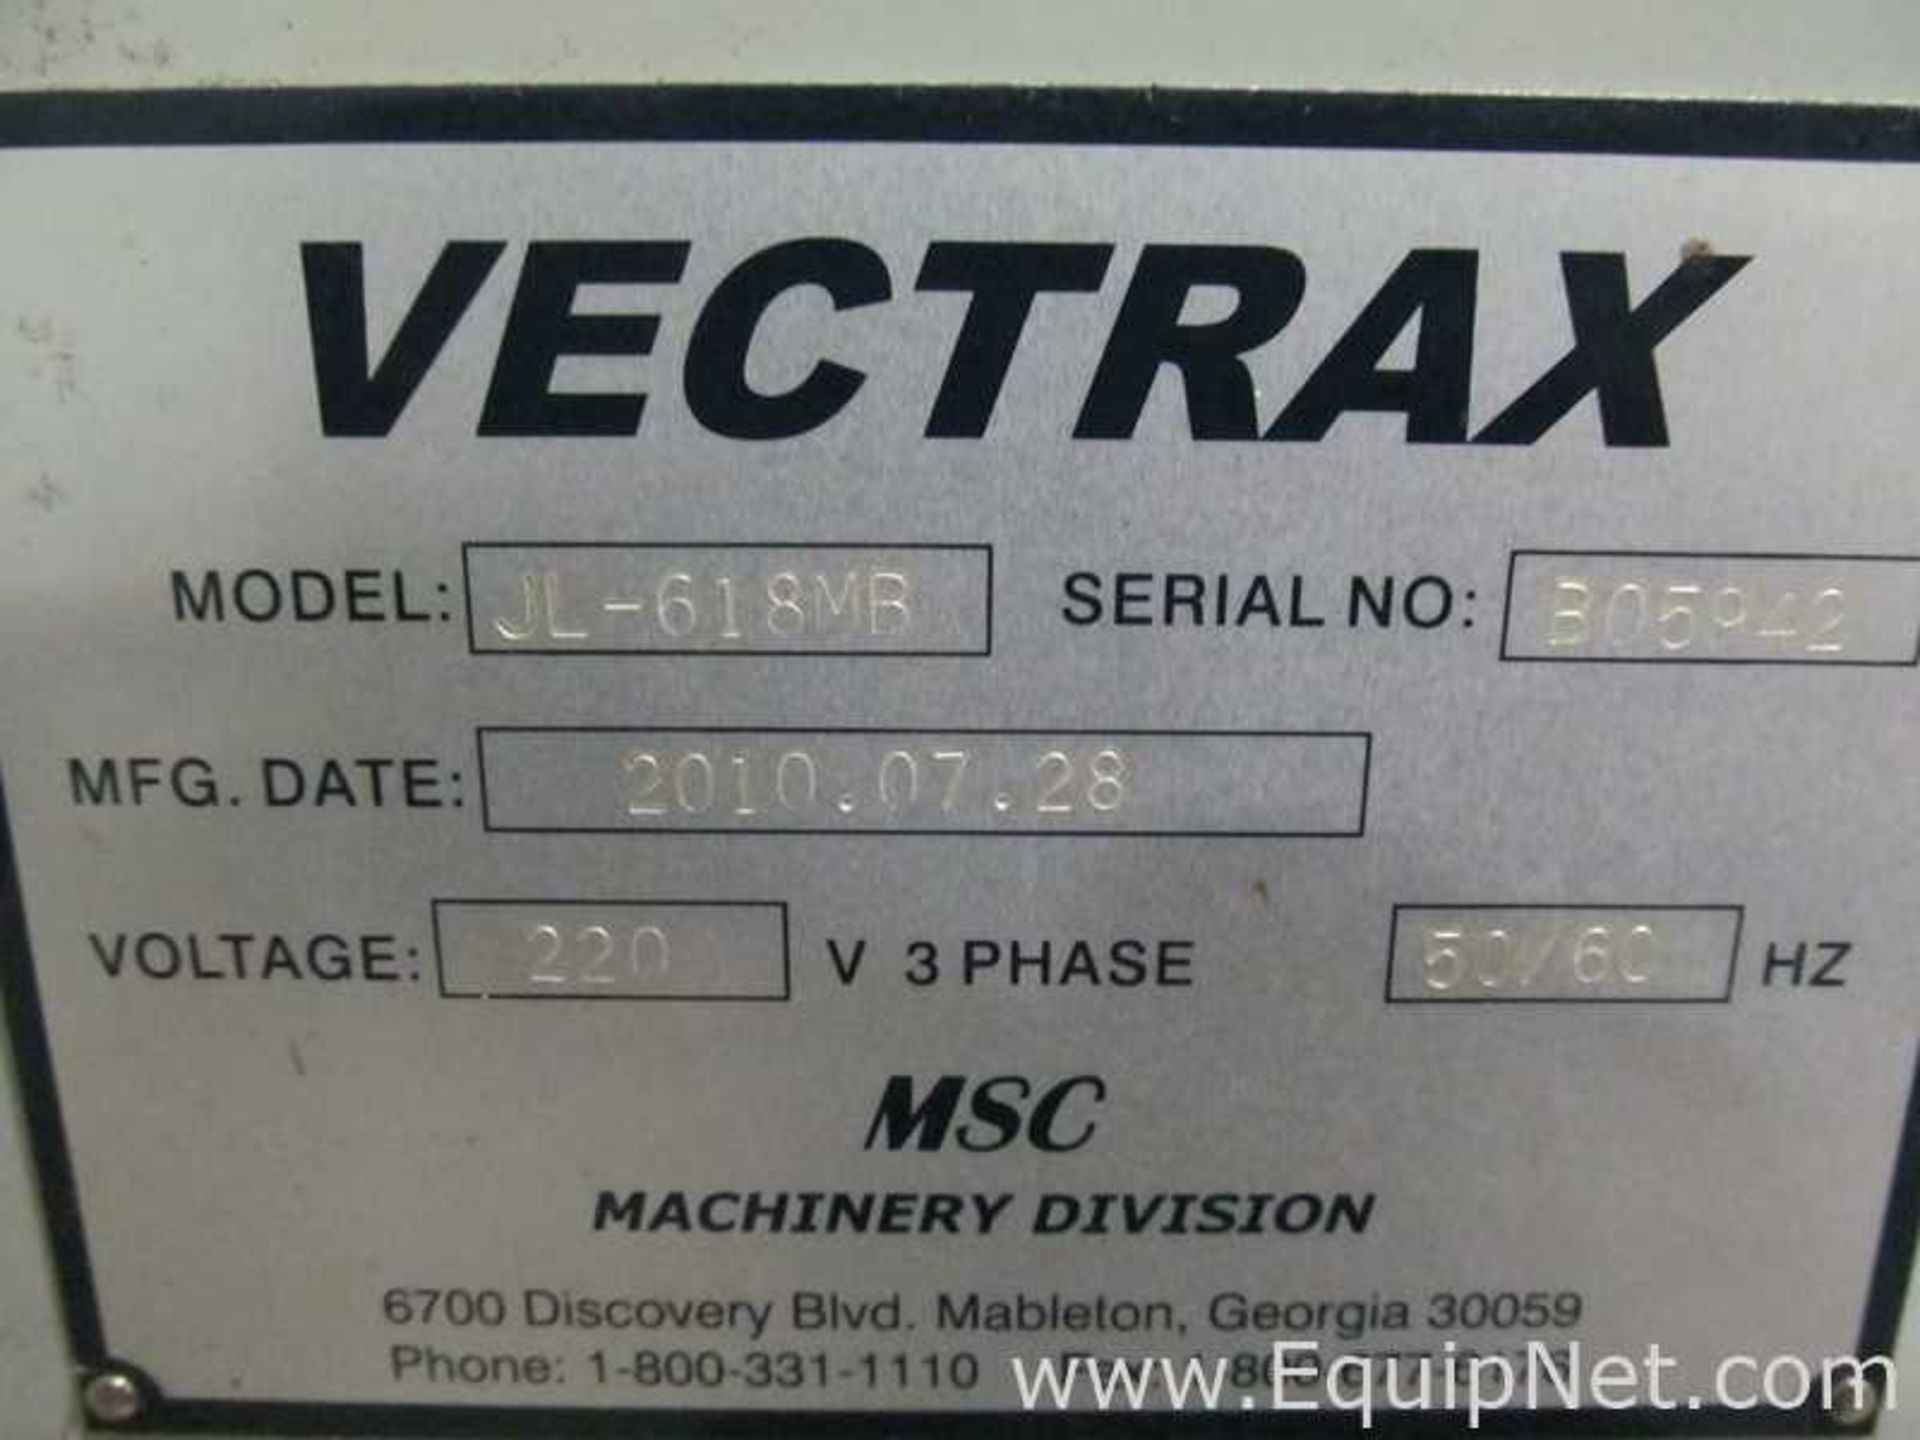 Vectrax JL-618MB 8 Inch Wheel Surface Grinder With Integrated Dust-Suction Cooling System - Image 15 of 15